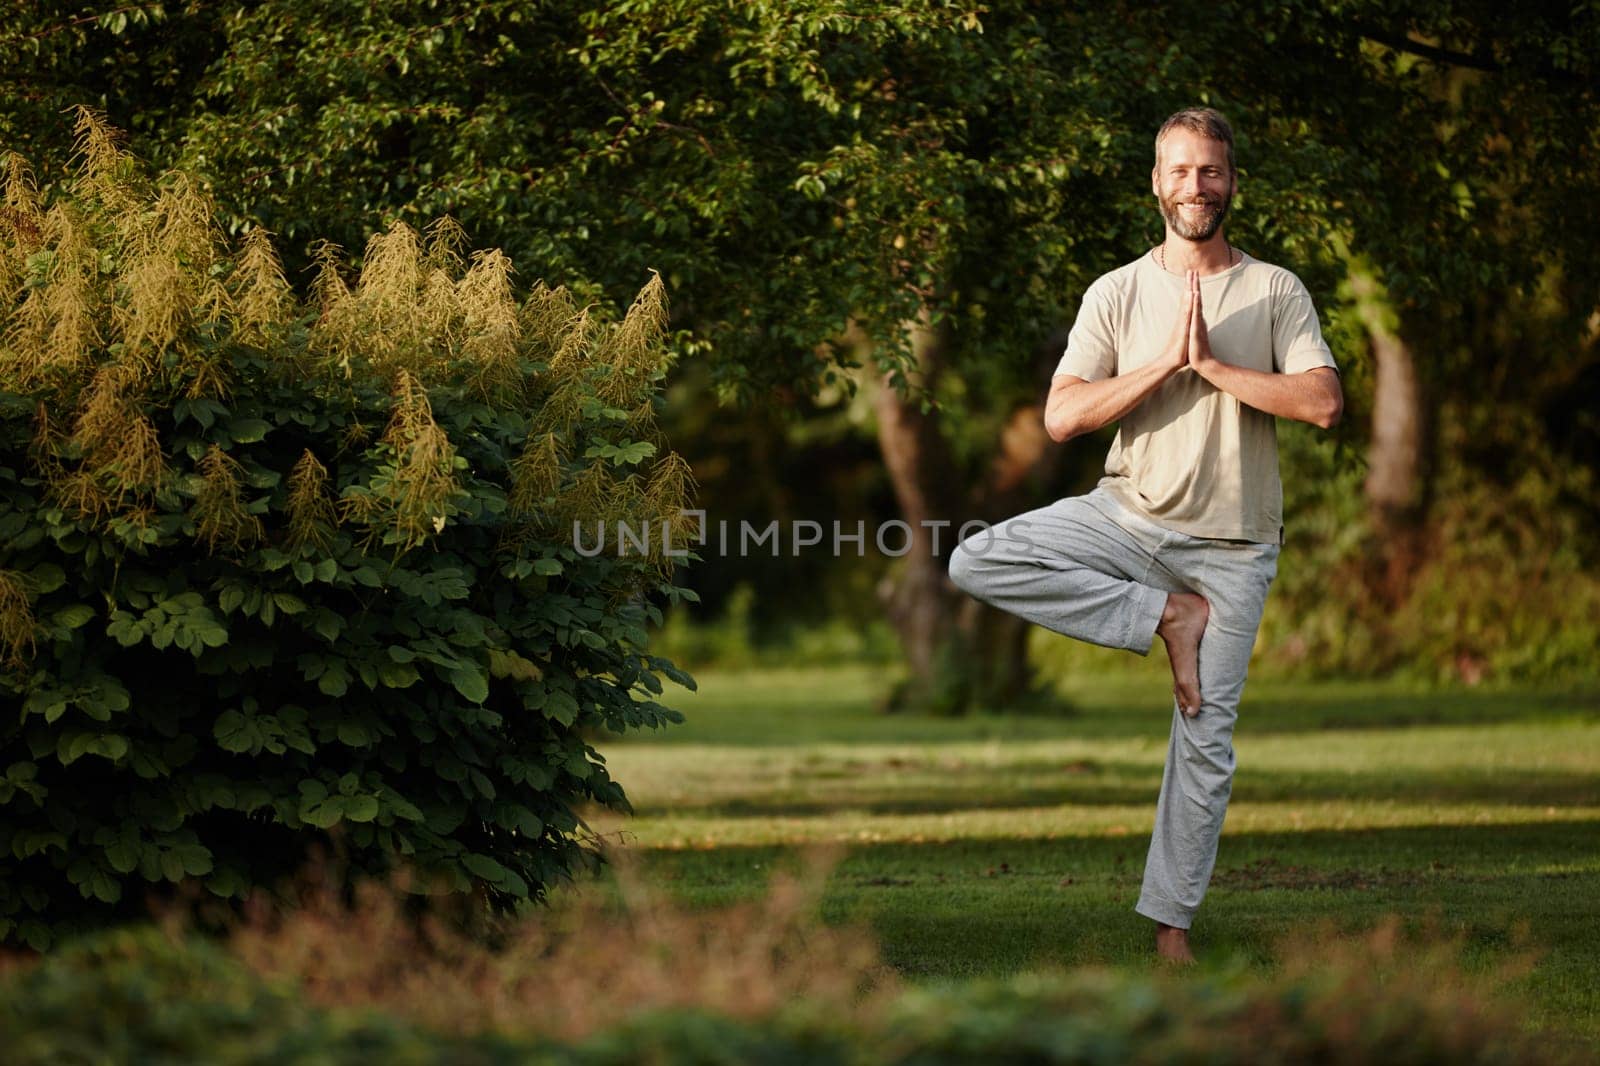 Yoga works for me. Portrait of a handsome mature man enjoying a yoga session in nature